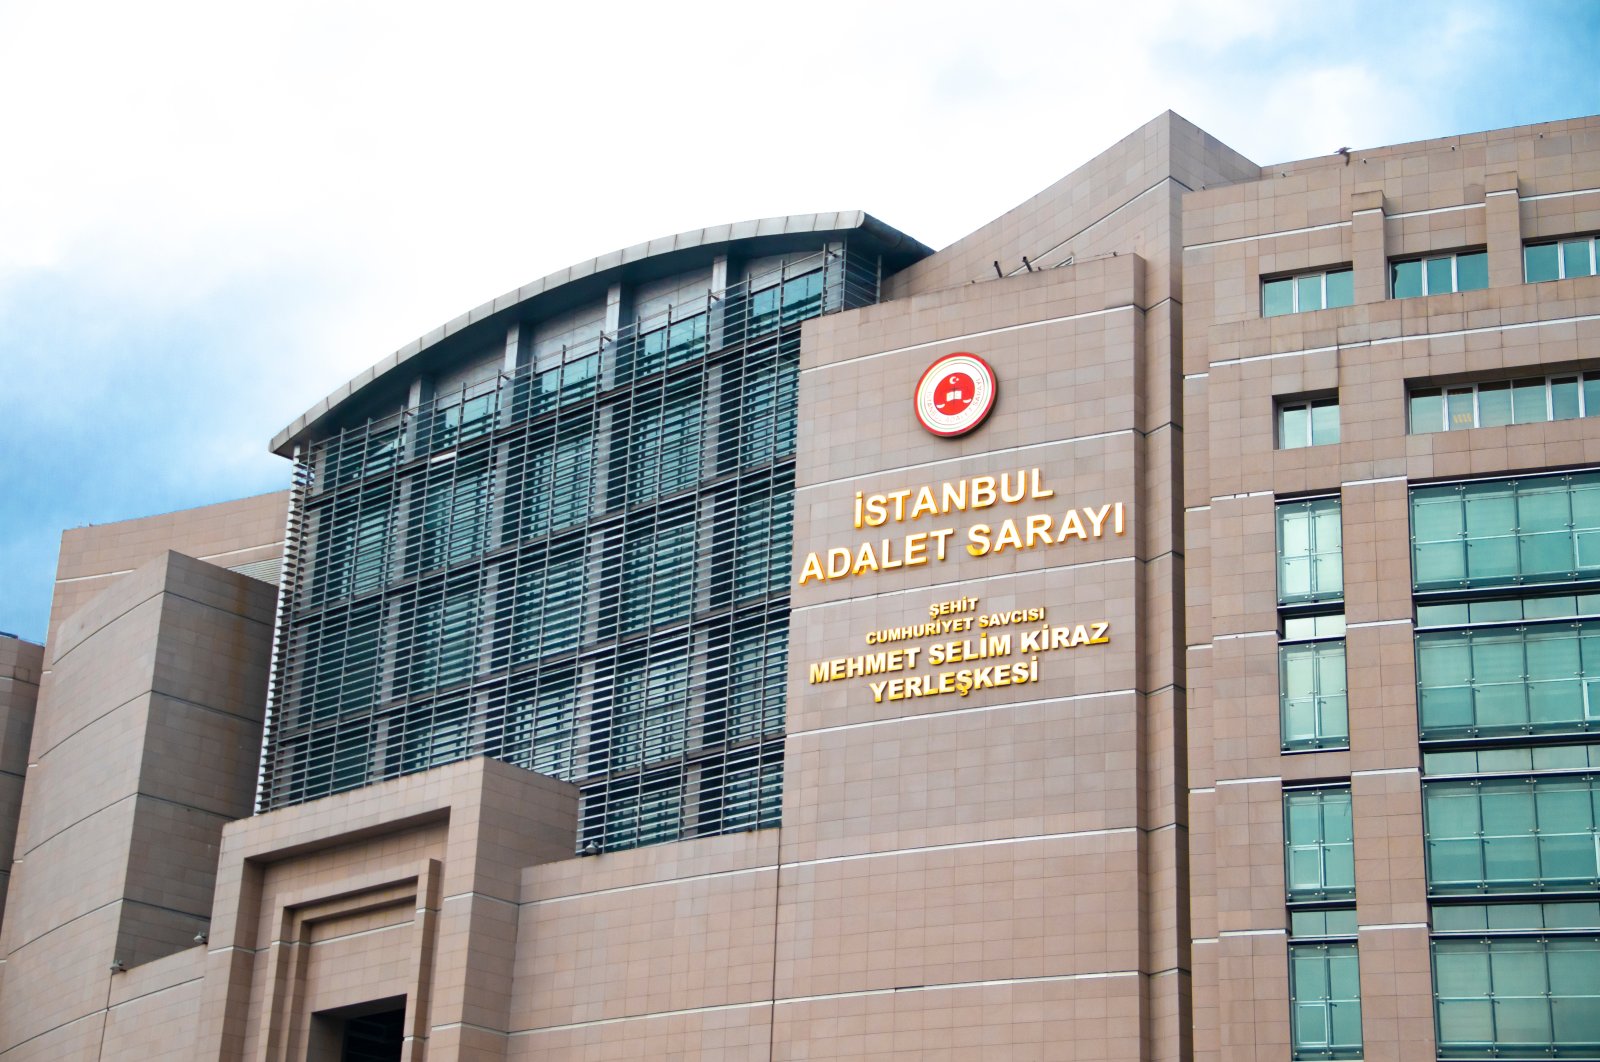 The courthouse where suspects were transferred, in Istanbul, Türkiye, April 7, 2019. (Shutterstock Photo)